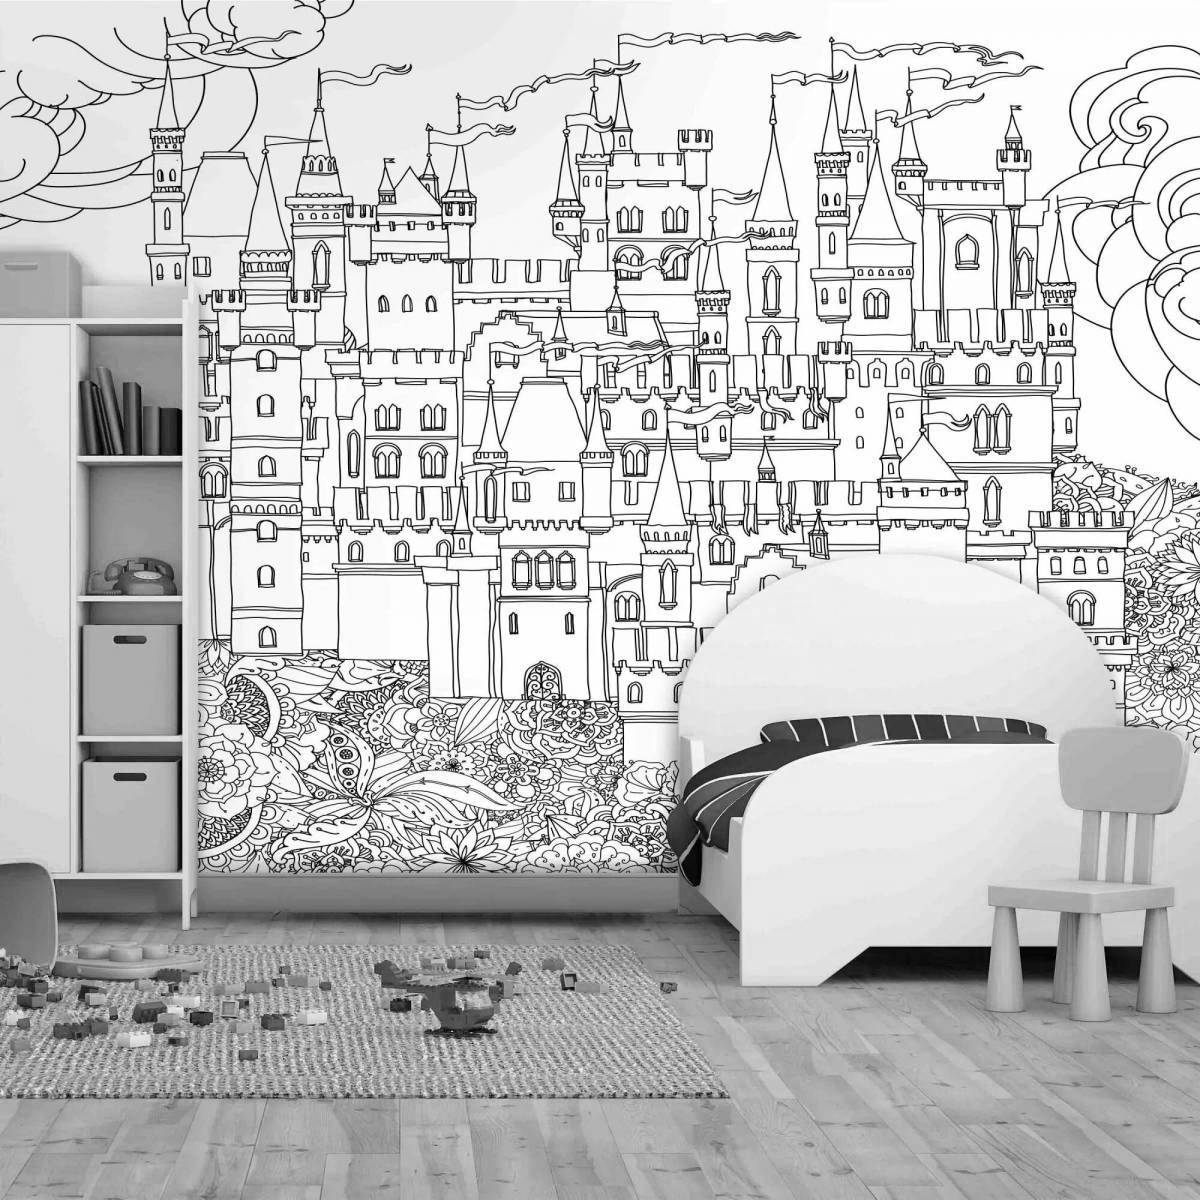 Creative wallpaper coloring in the nursery